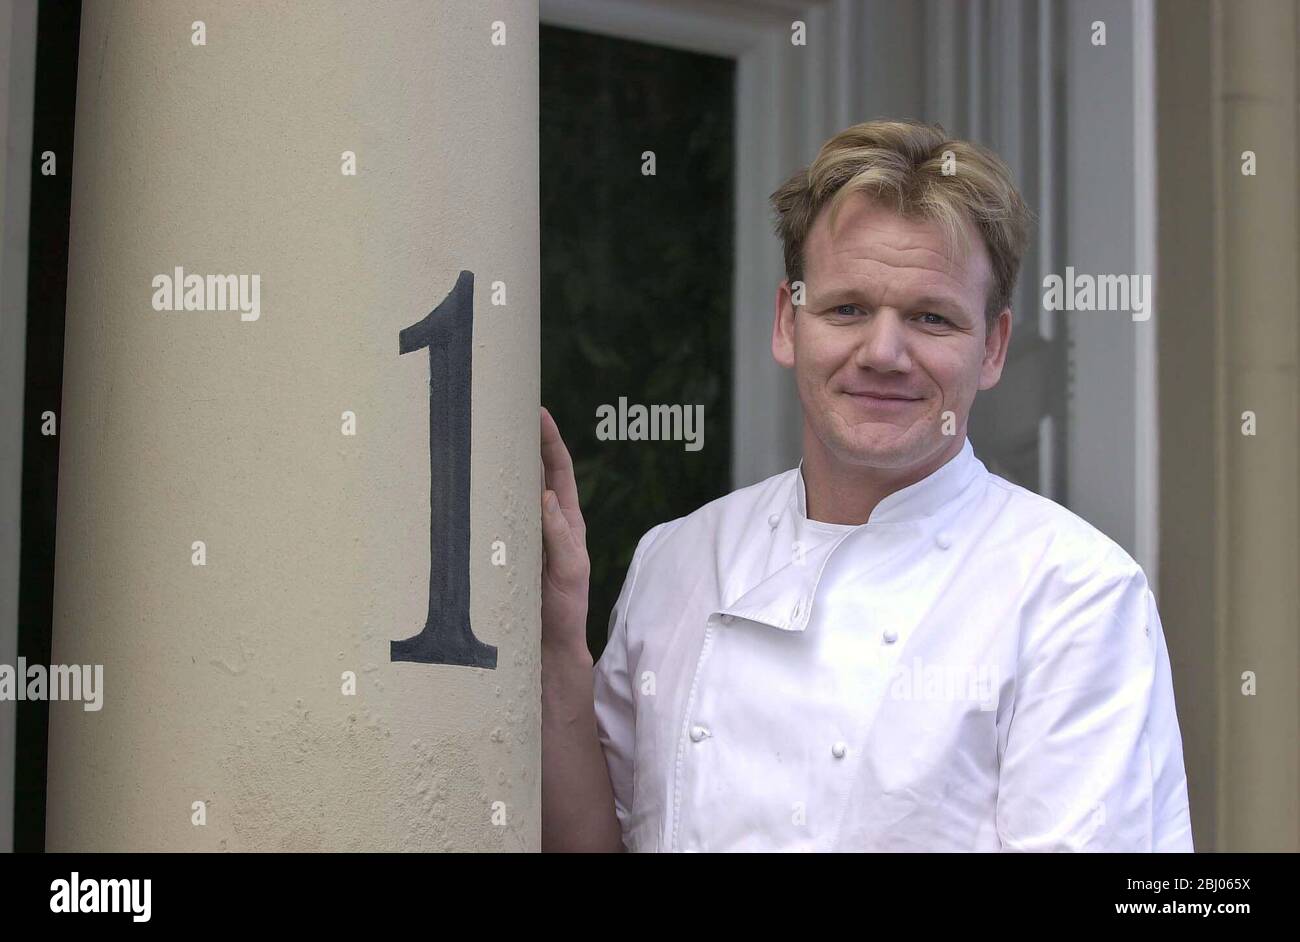 TOP SCOTTISH CHEF GORDON RAMSAY ANNOUNCED DETAILS OF HIS DEAL WITH RESIDENCE INTERNATIONAL TO RUN THE RESTAURANT AT ONE DEVONSHIRE GARDENS, GLASGOW'S EXCULSIVE HOTEL. - - Stock Photo